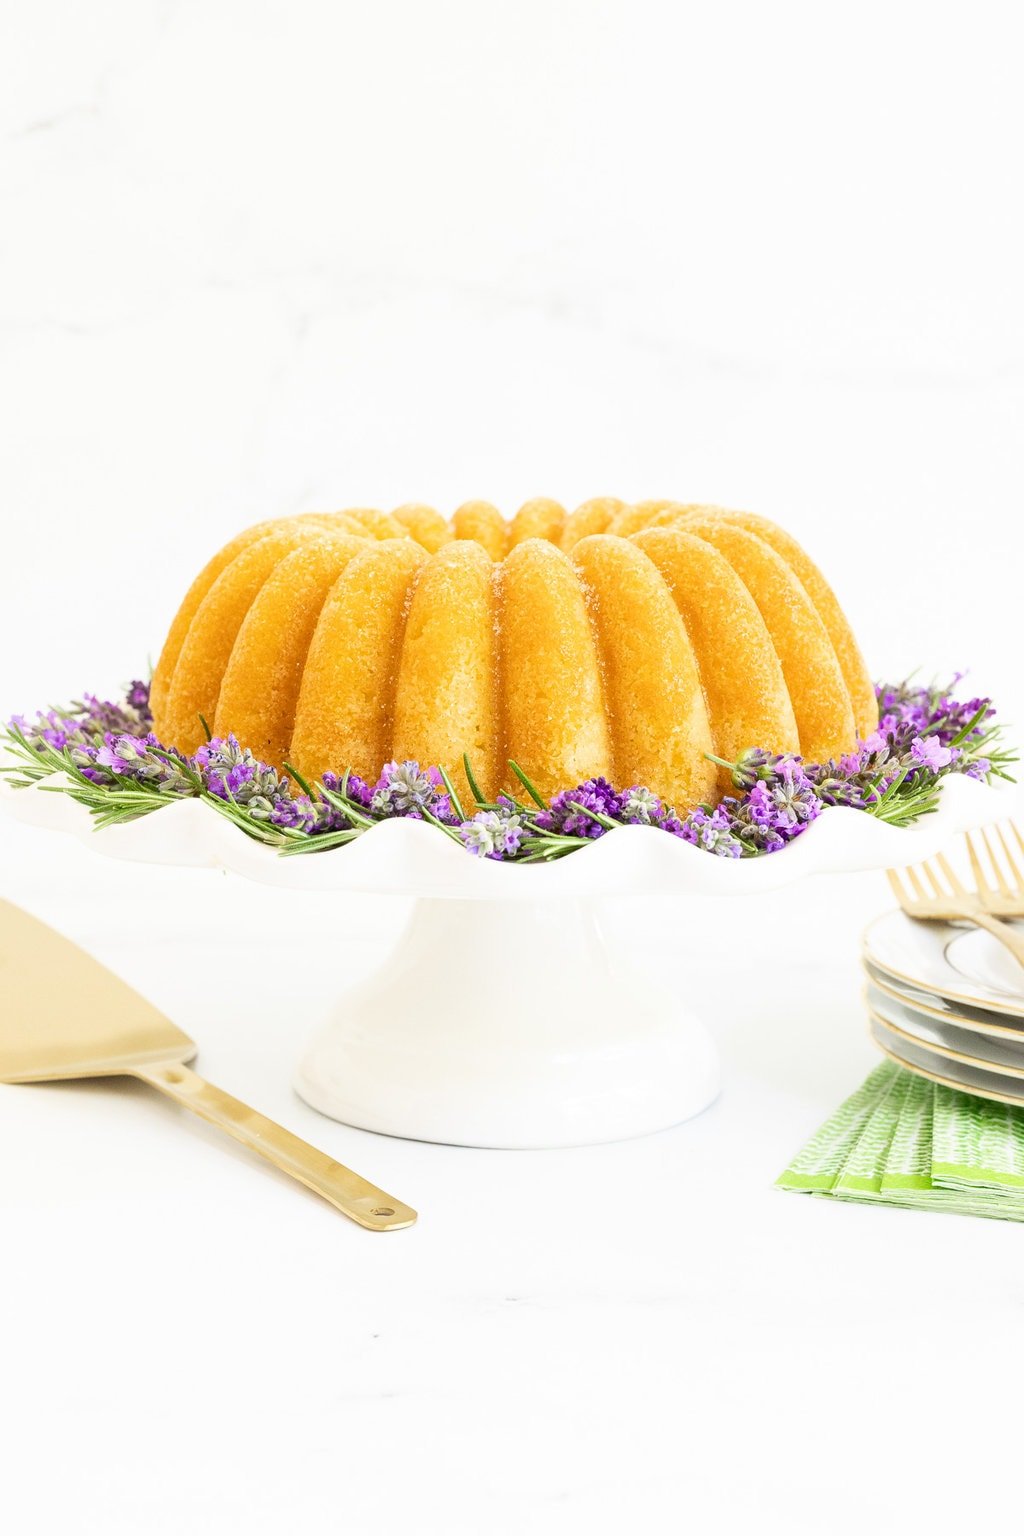 Horizontal photo of a Ridiculously Easy Sugar-Glazed Ricotta Bundt Cake on a white scalloped pedestal plate surrounded by fresh rosemary and lavender sprigs.